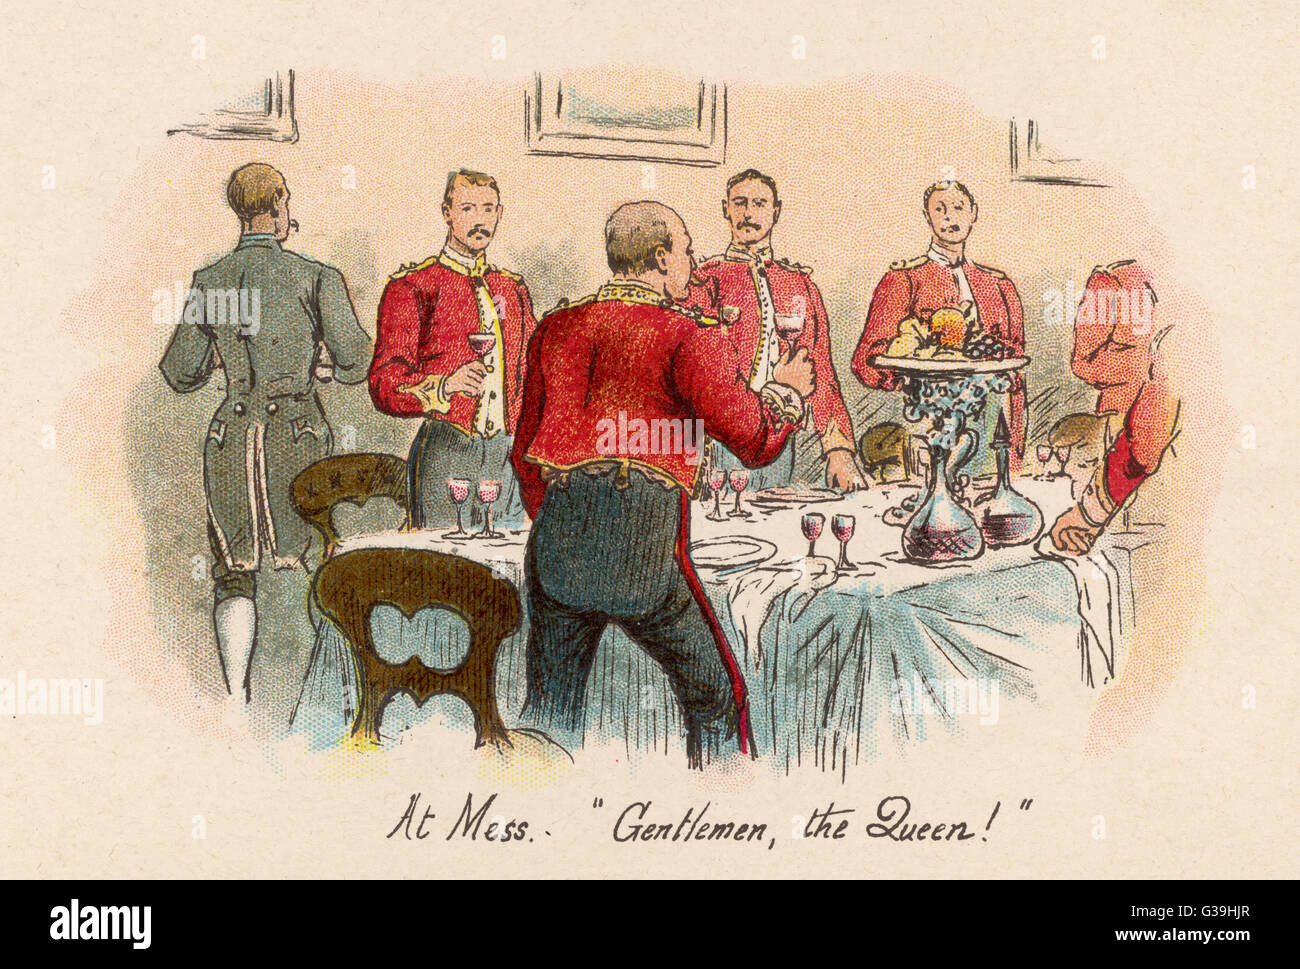 Officers Stand To Drink A Loyal Toast To Queen Victoria In The Regimental Mess Date Circa 1890